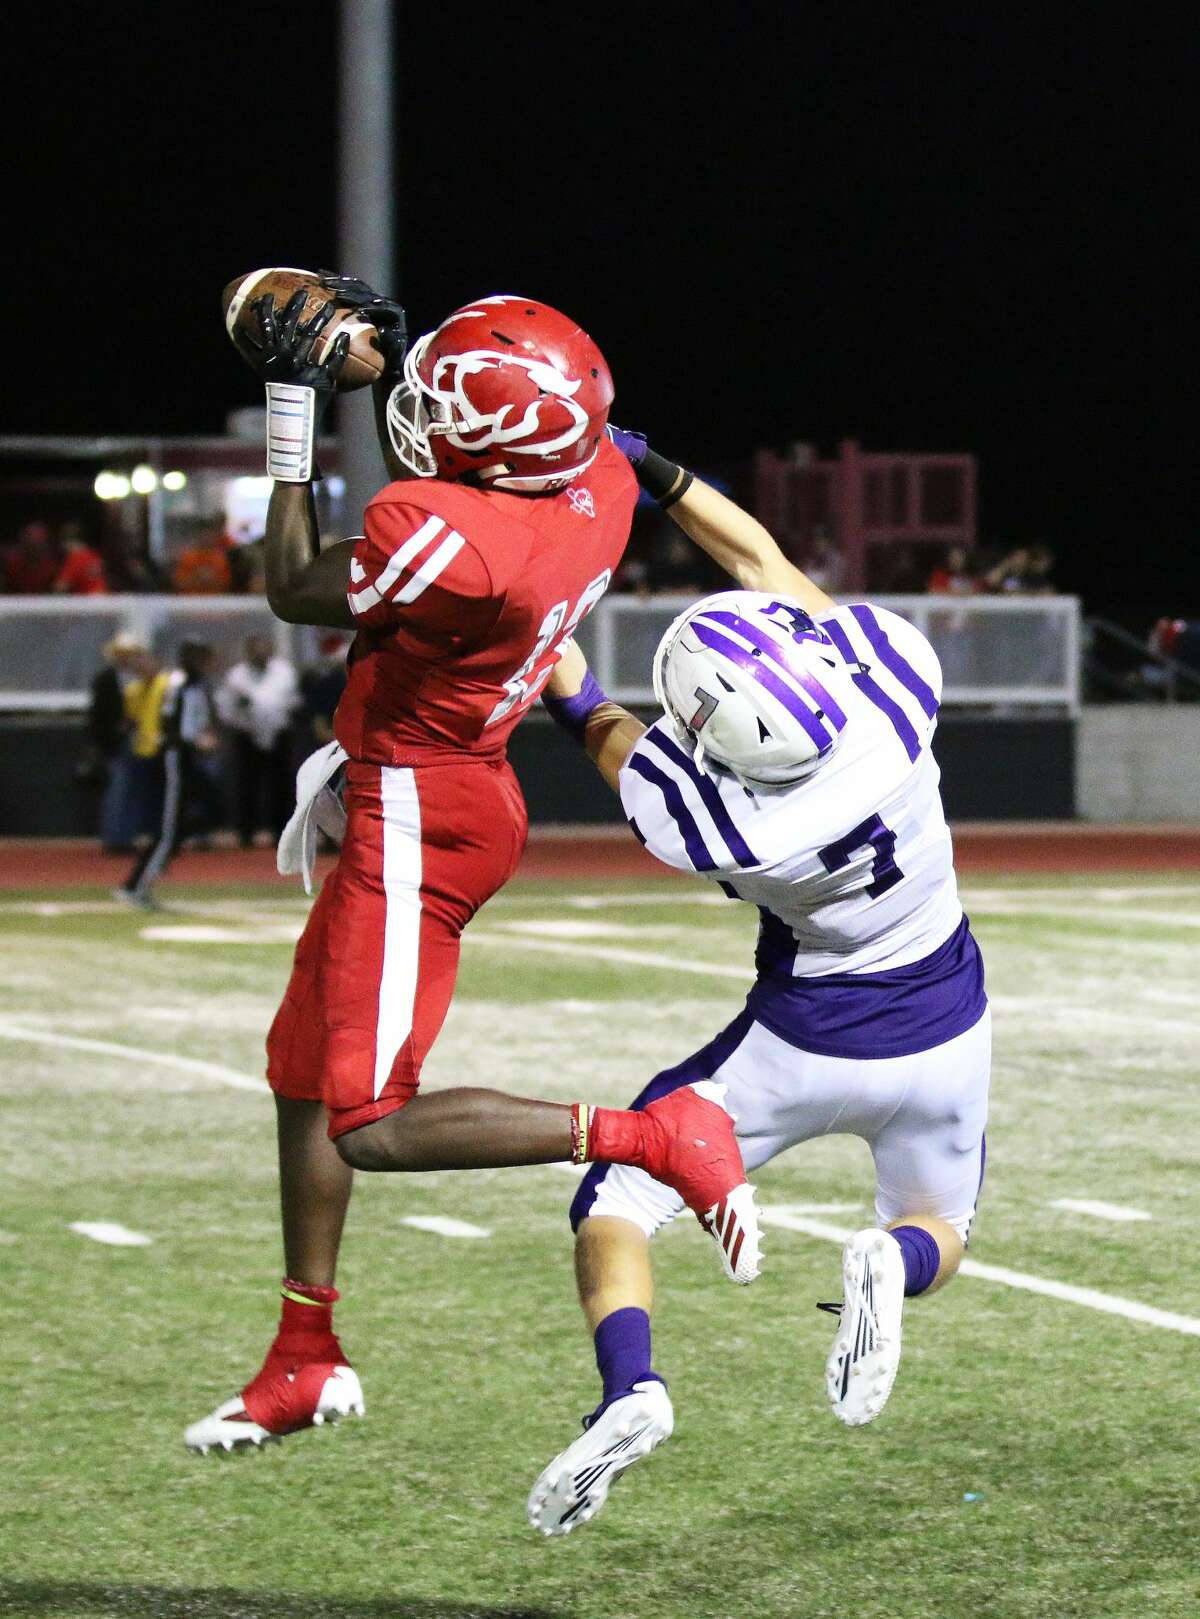 Crosby senior wide receiver Marquise Doucette goes up for a  Jaiden Howard pass while Dayton junior Brice Chimene tries to defend. The Cougars eventually scored a few plays later to extend their lead over the Broncos.